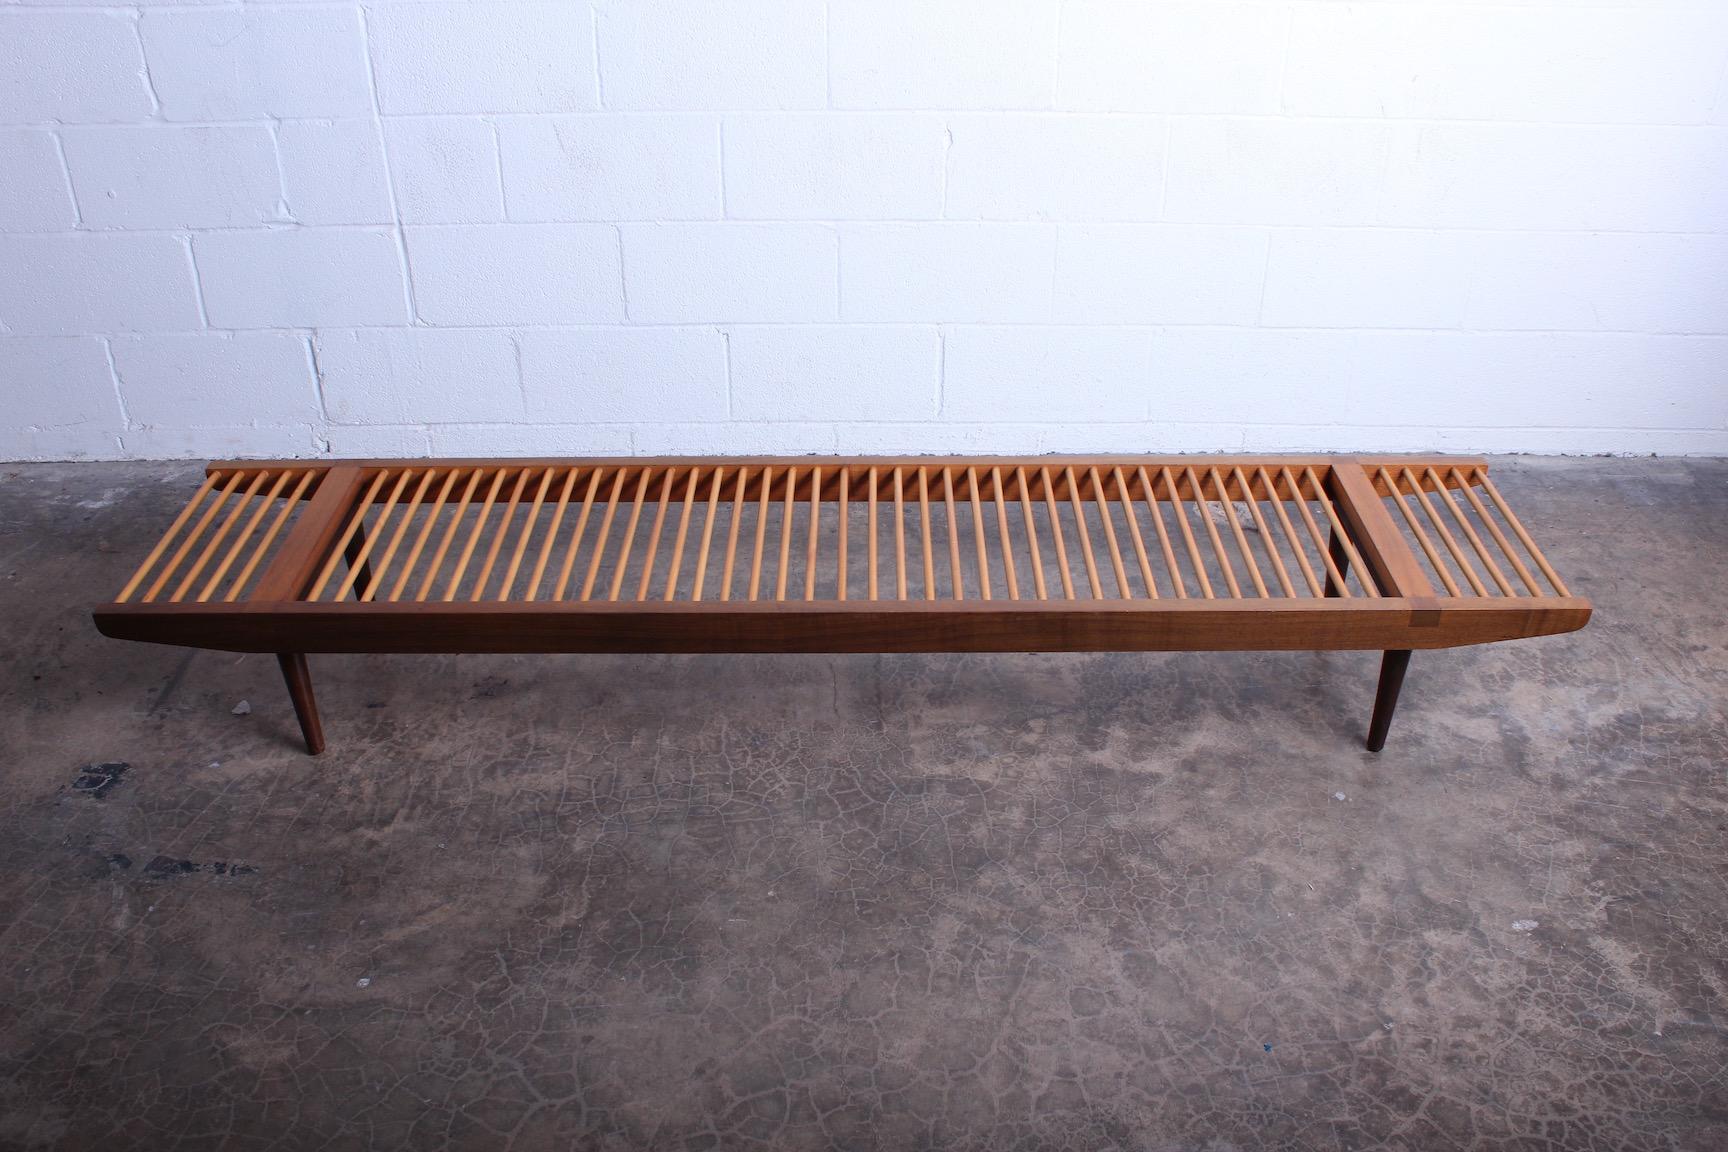 A maple and walnut dowel bench designed by Milo Baughman for Glen of California.